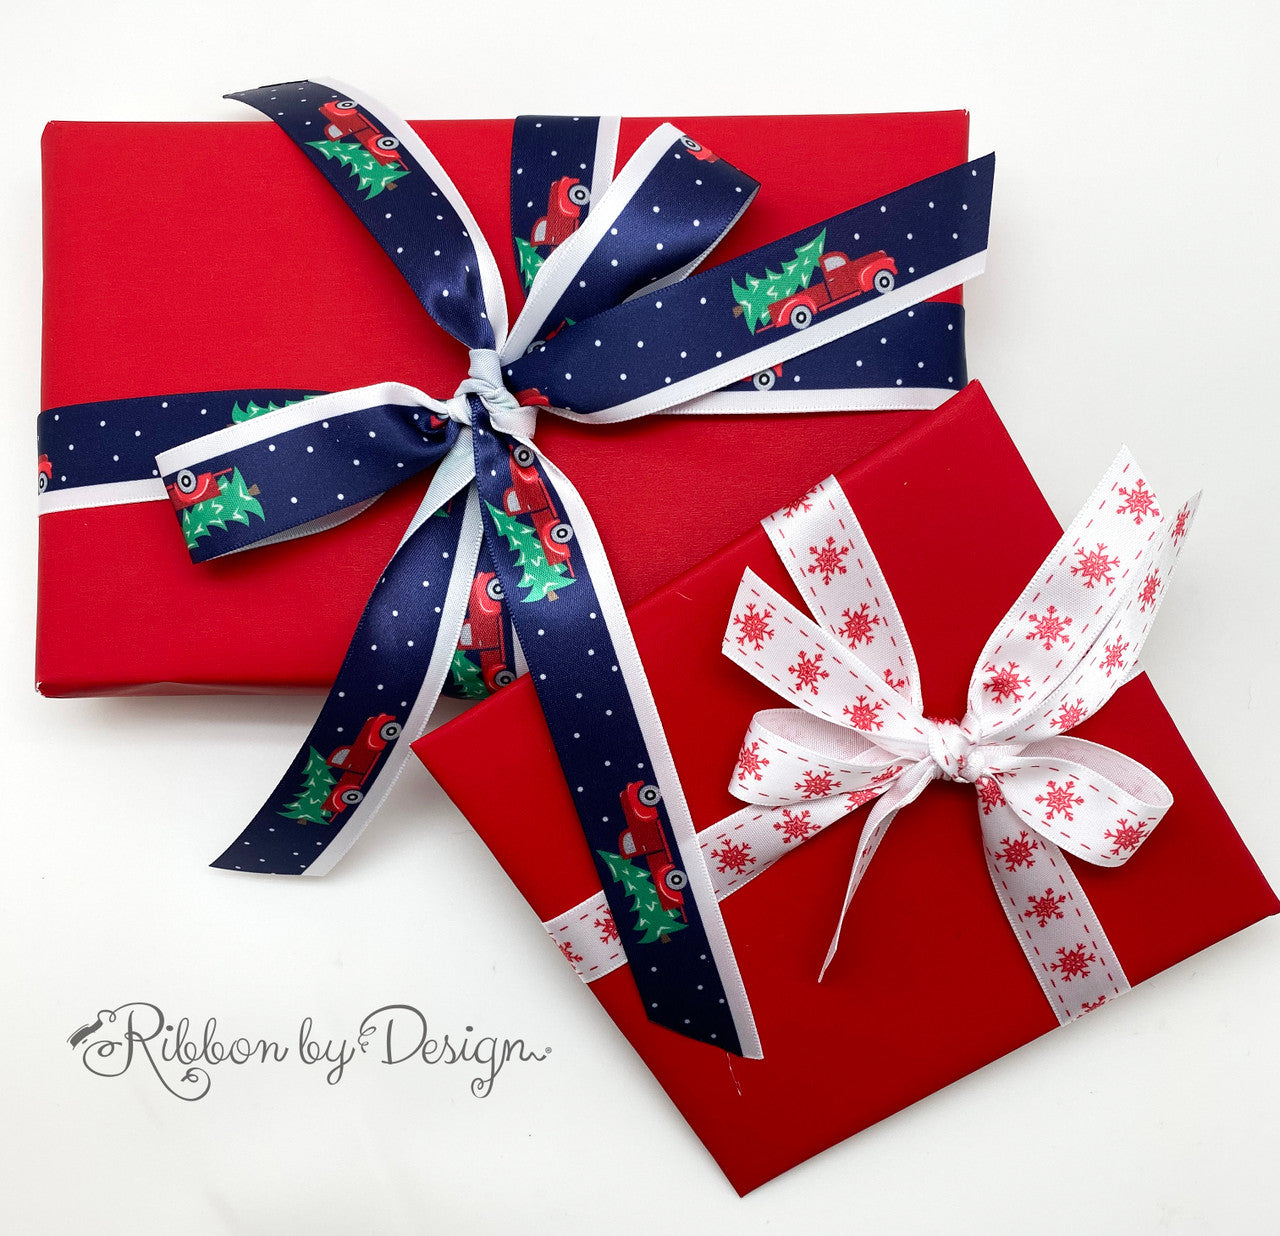 Pair our 7/8" satin red truck with the 5/8" satin snow flake ribbon to create some beautiful Winter themed holiday gifts!